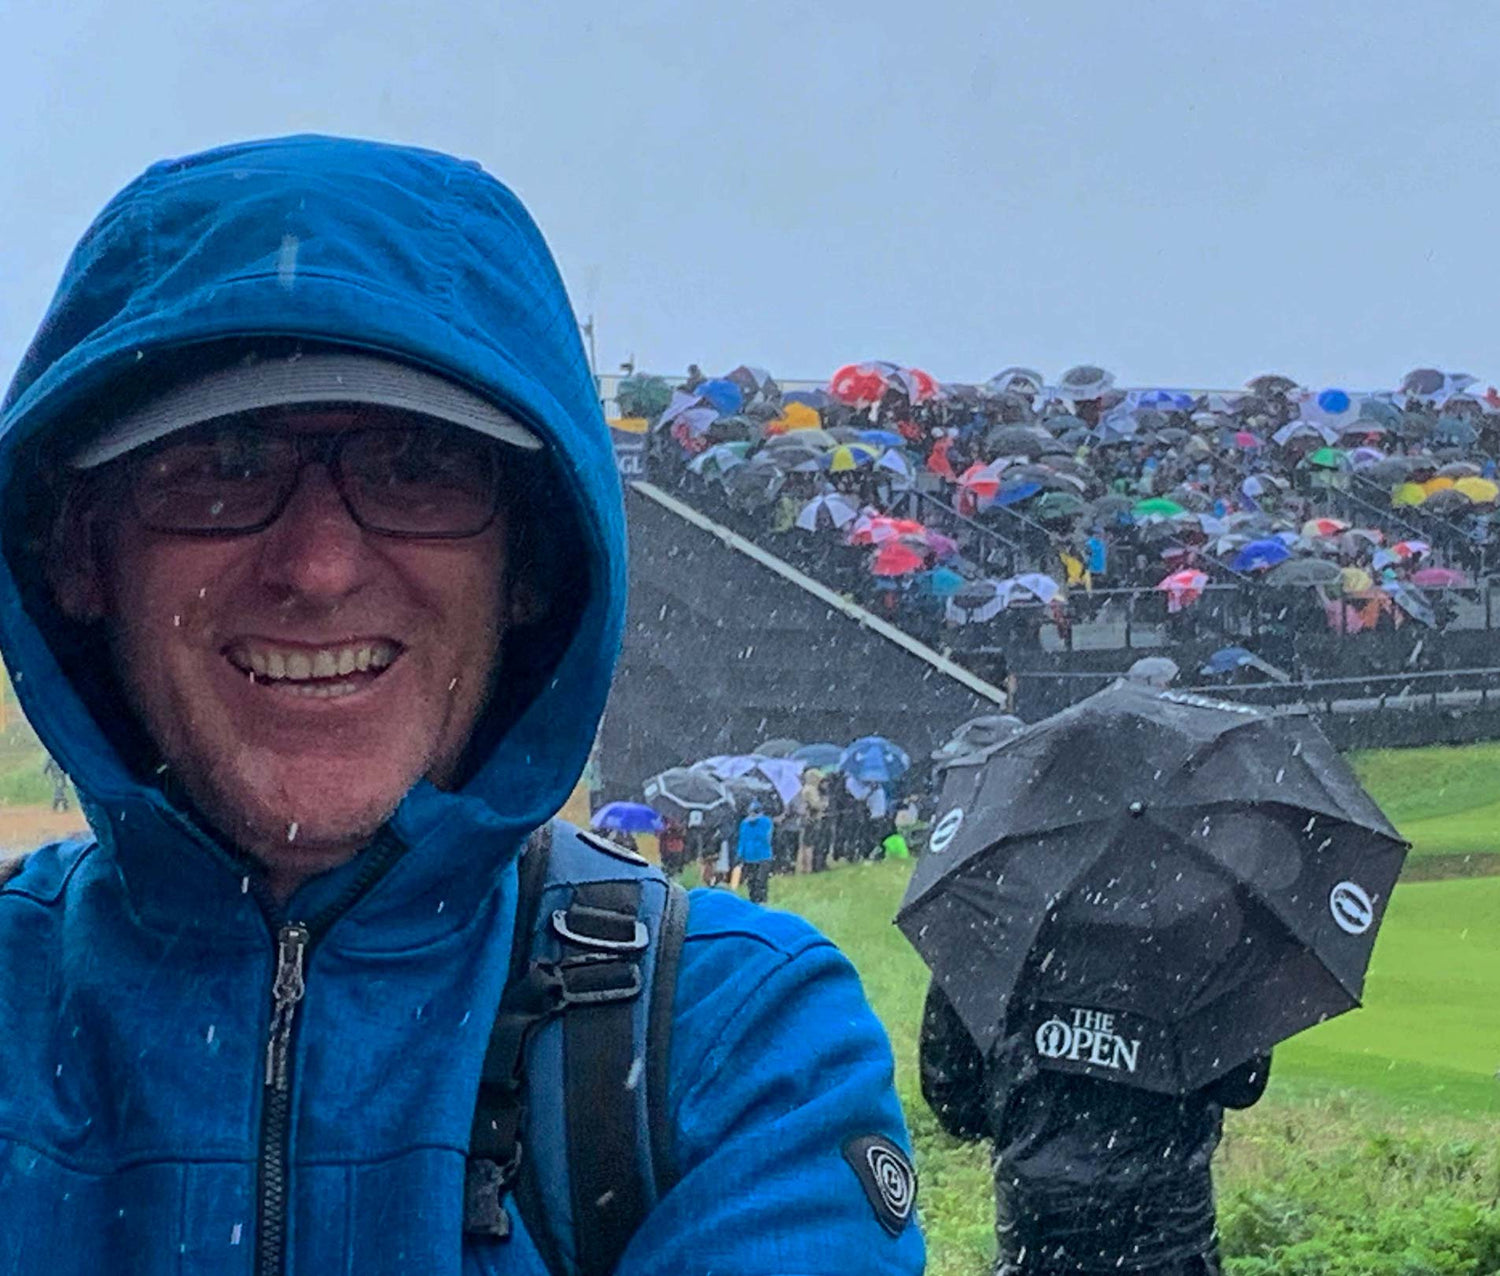 A photo of NI Silver's Steve facing the camera with the British Open golf competition taking part in the background. The rain is pouring down so lots of colourful umbrellas are sheltering people.